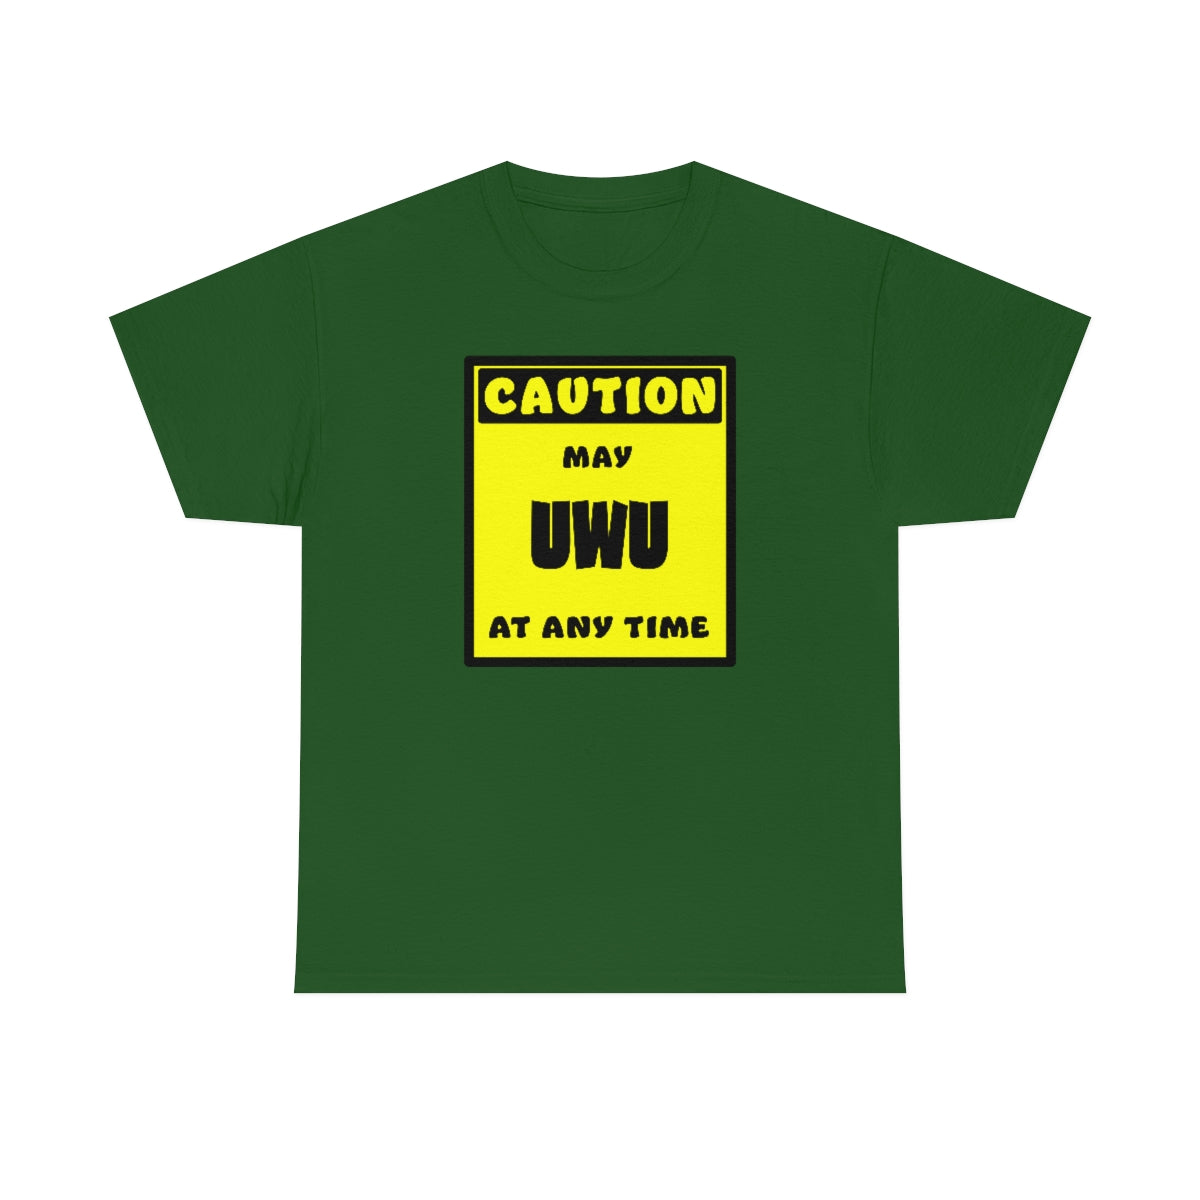 CAUTION! May UWU at any time! - T-Shirt T-Shirt AFLT-Whootorca Green S 